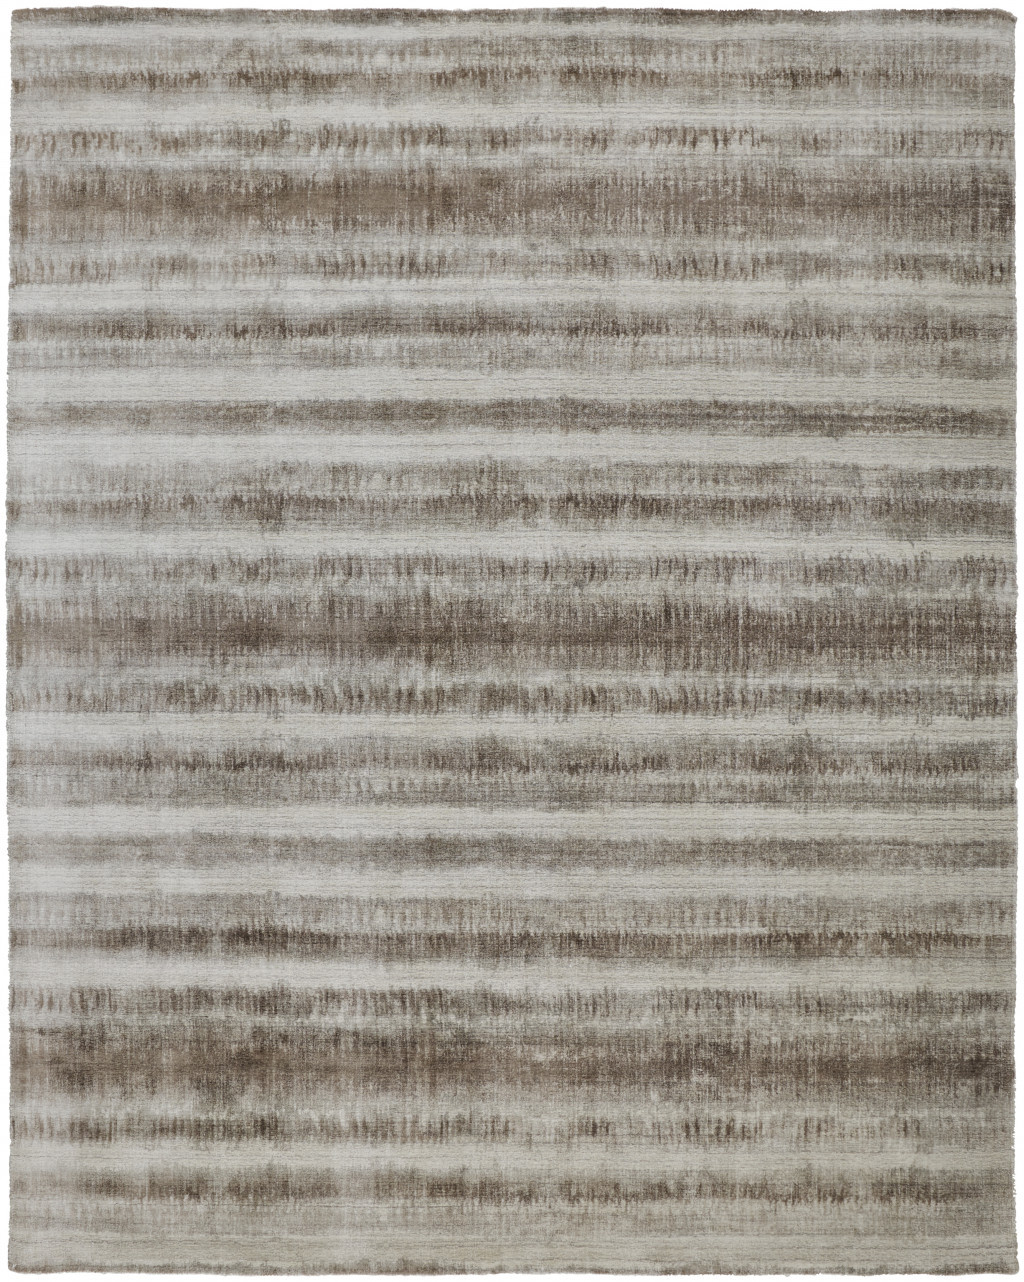 10' X 14' Tan Ivory And Brown Abstract Hand Woven Area Rug-514439-1